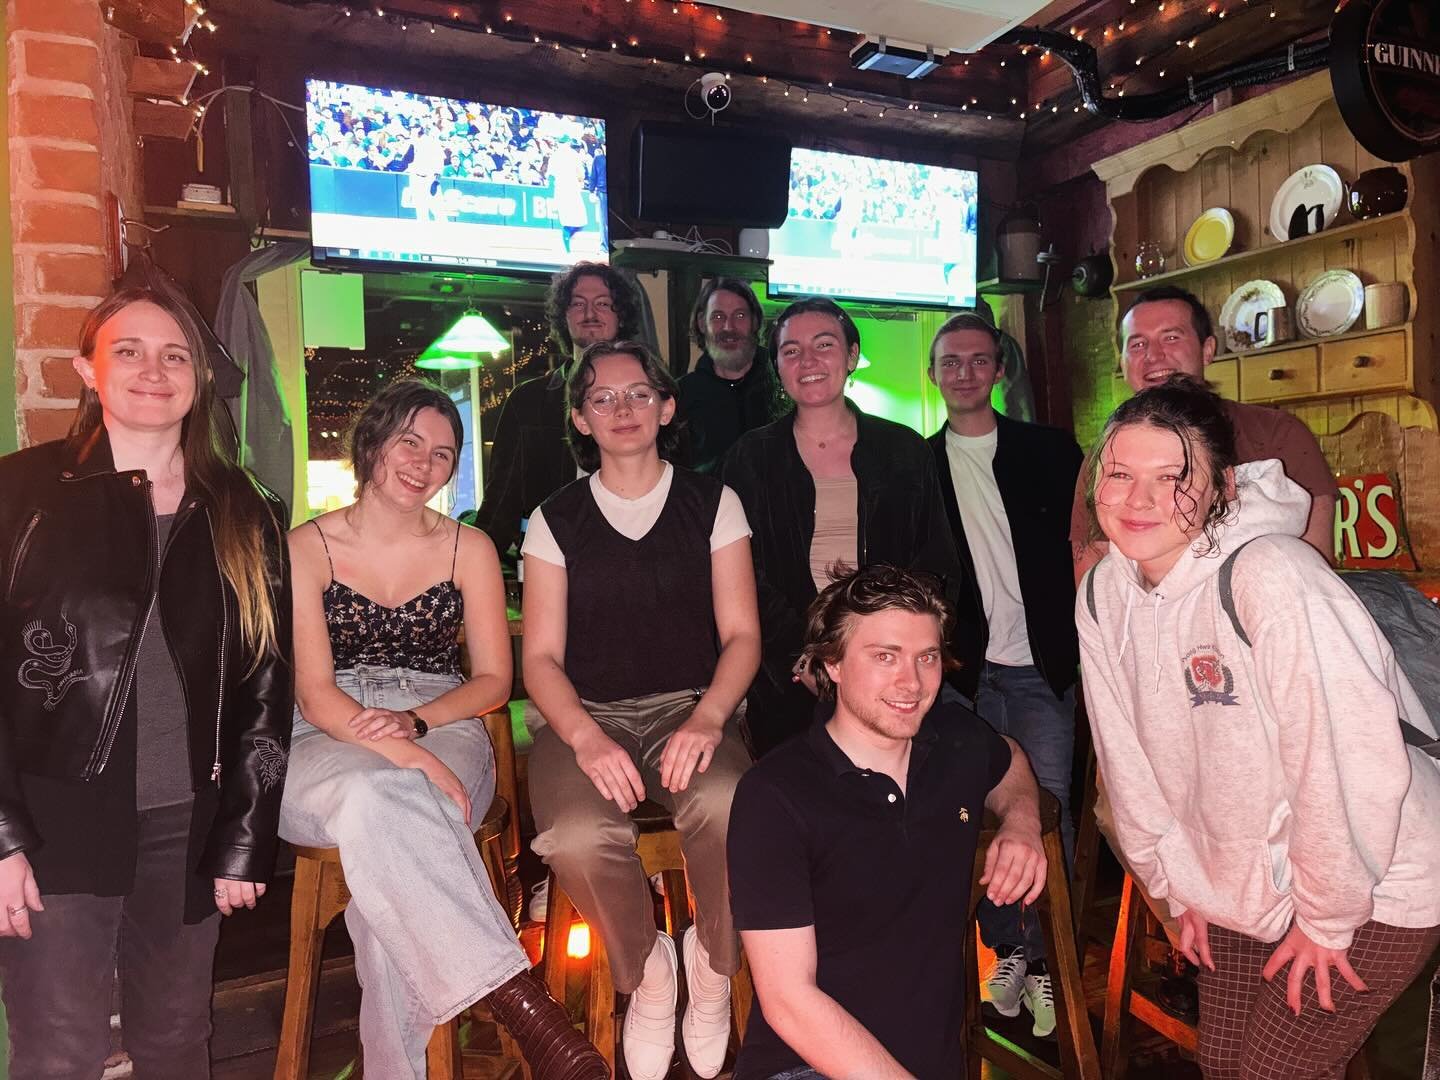 An ch&eacute;ad Pop-Up Gaeltacht an earraigh 🌷💐🌻

💚 Last night, GAELTACHT NYC met at Paddy Reilly&rsquo;s for a Pop-Up and session with the regular crew. After a rainy April day, it was the perfect cozy gathering of friends :) 

☀️ As the weather